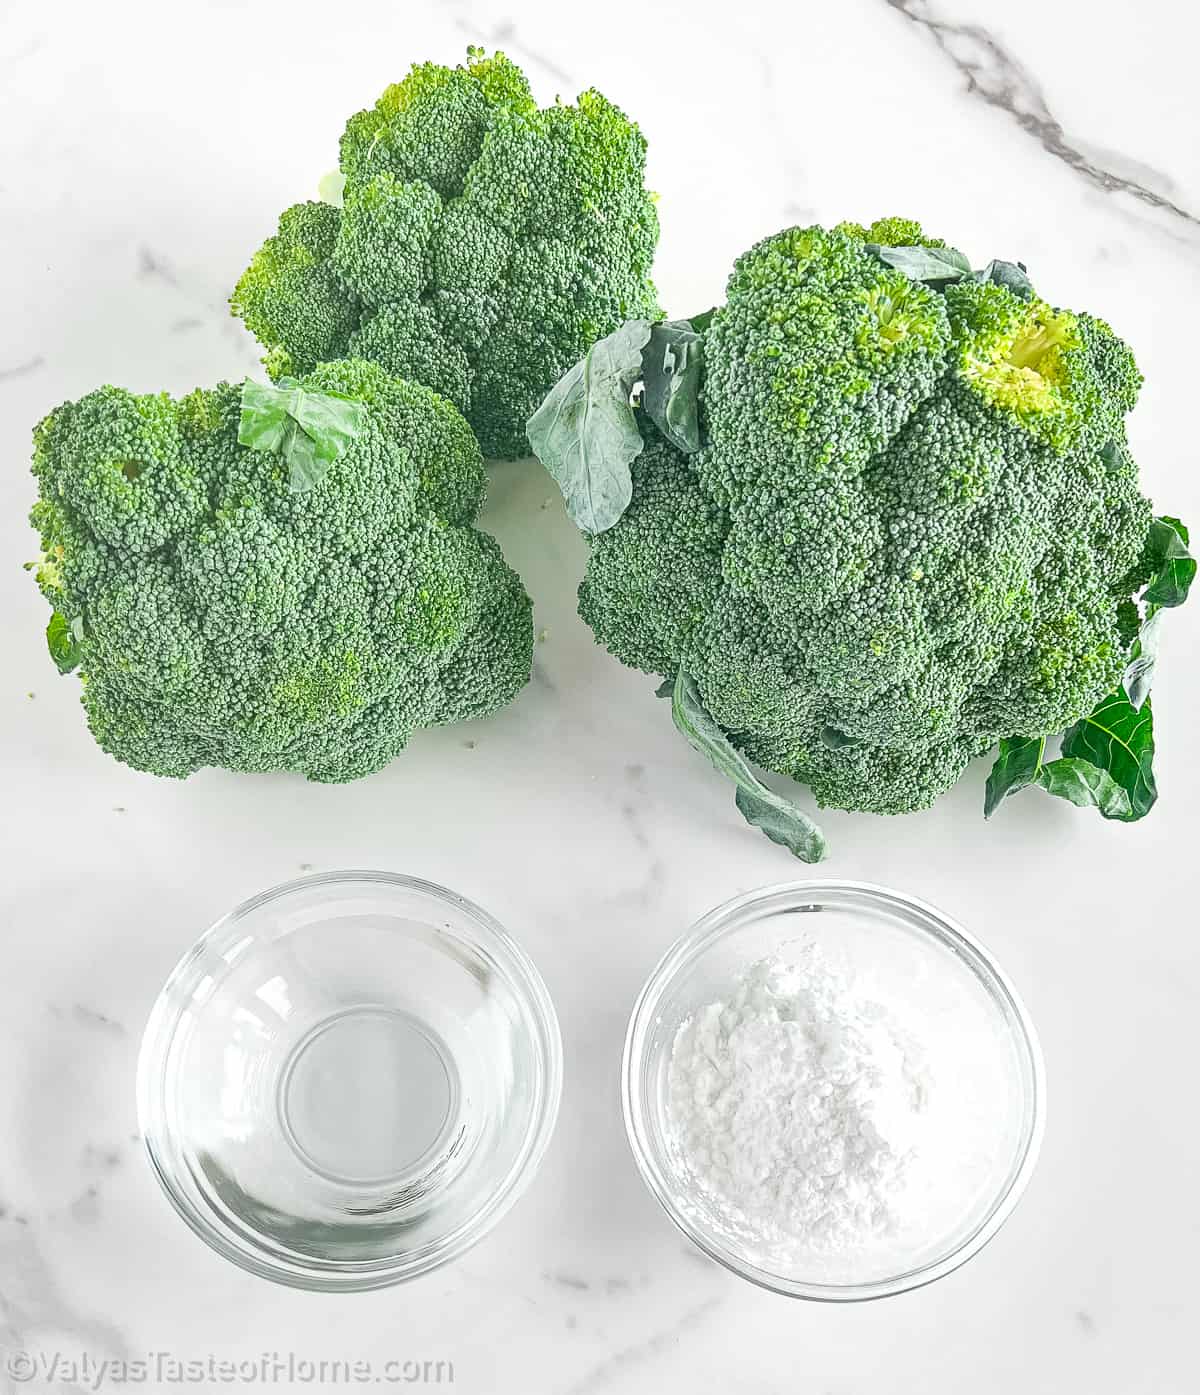 we will be using broccoli florets to make this recipe. They will add a crunchy and vibrant element to the dish, providing a healthy dose of nutrients.